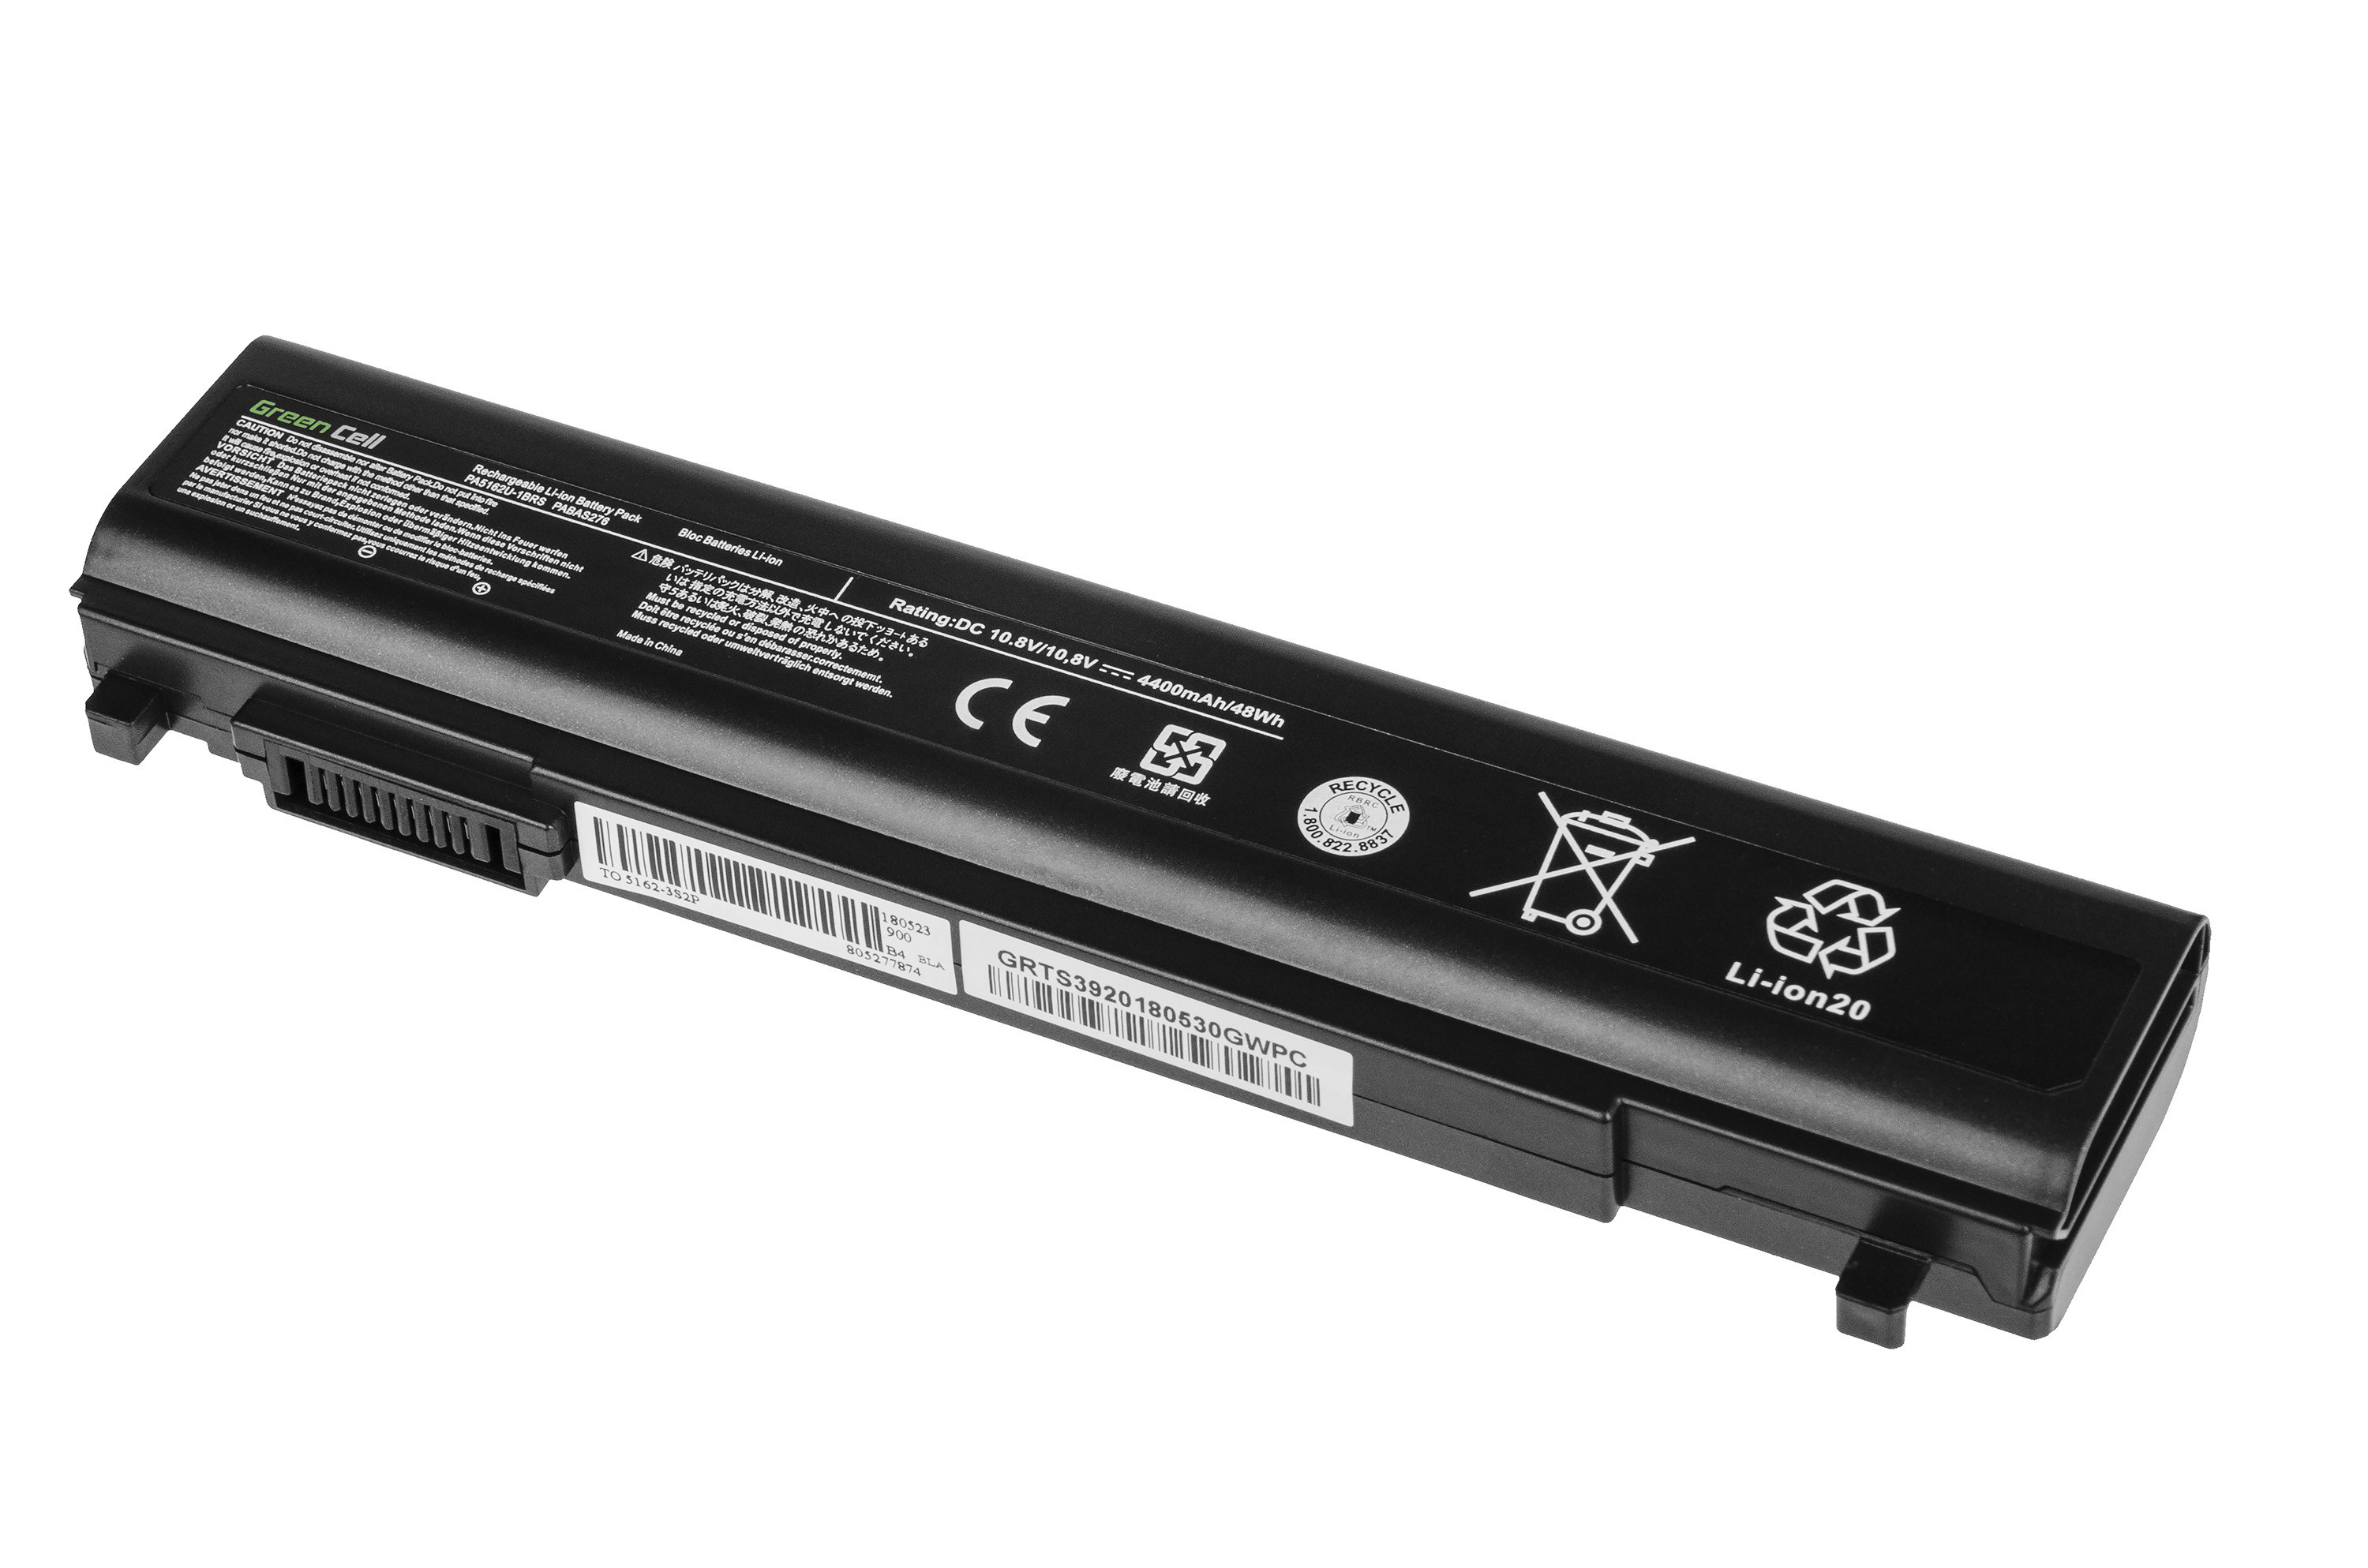 Green Cell Battery PA5162U-1BRS for Toshiba Portege R30 R30-A R30-A-134 R30-A-14K R30-A-17K R30-A-15D R30-A-1C5